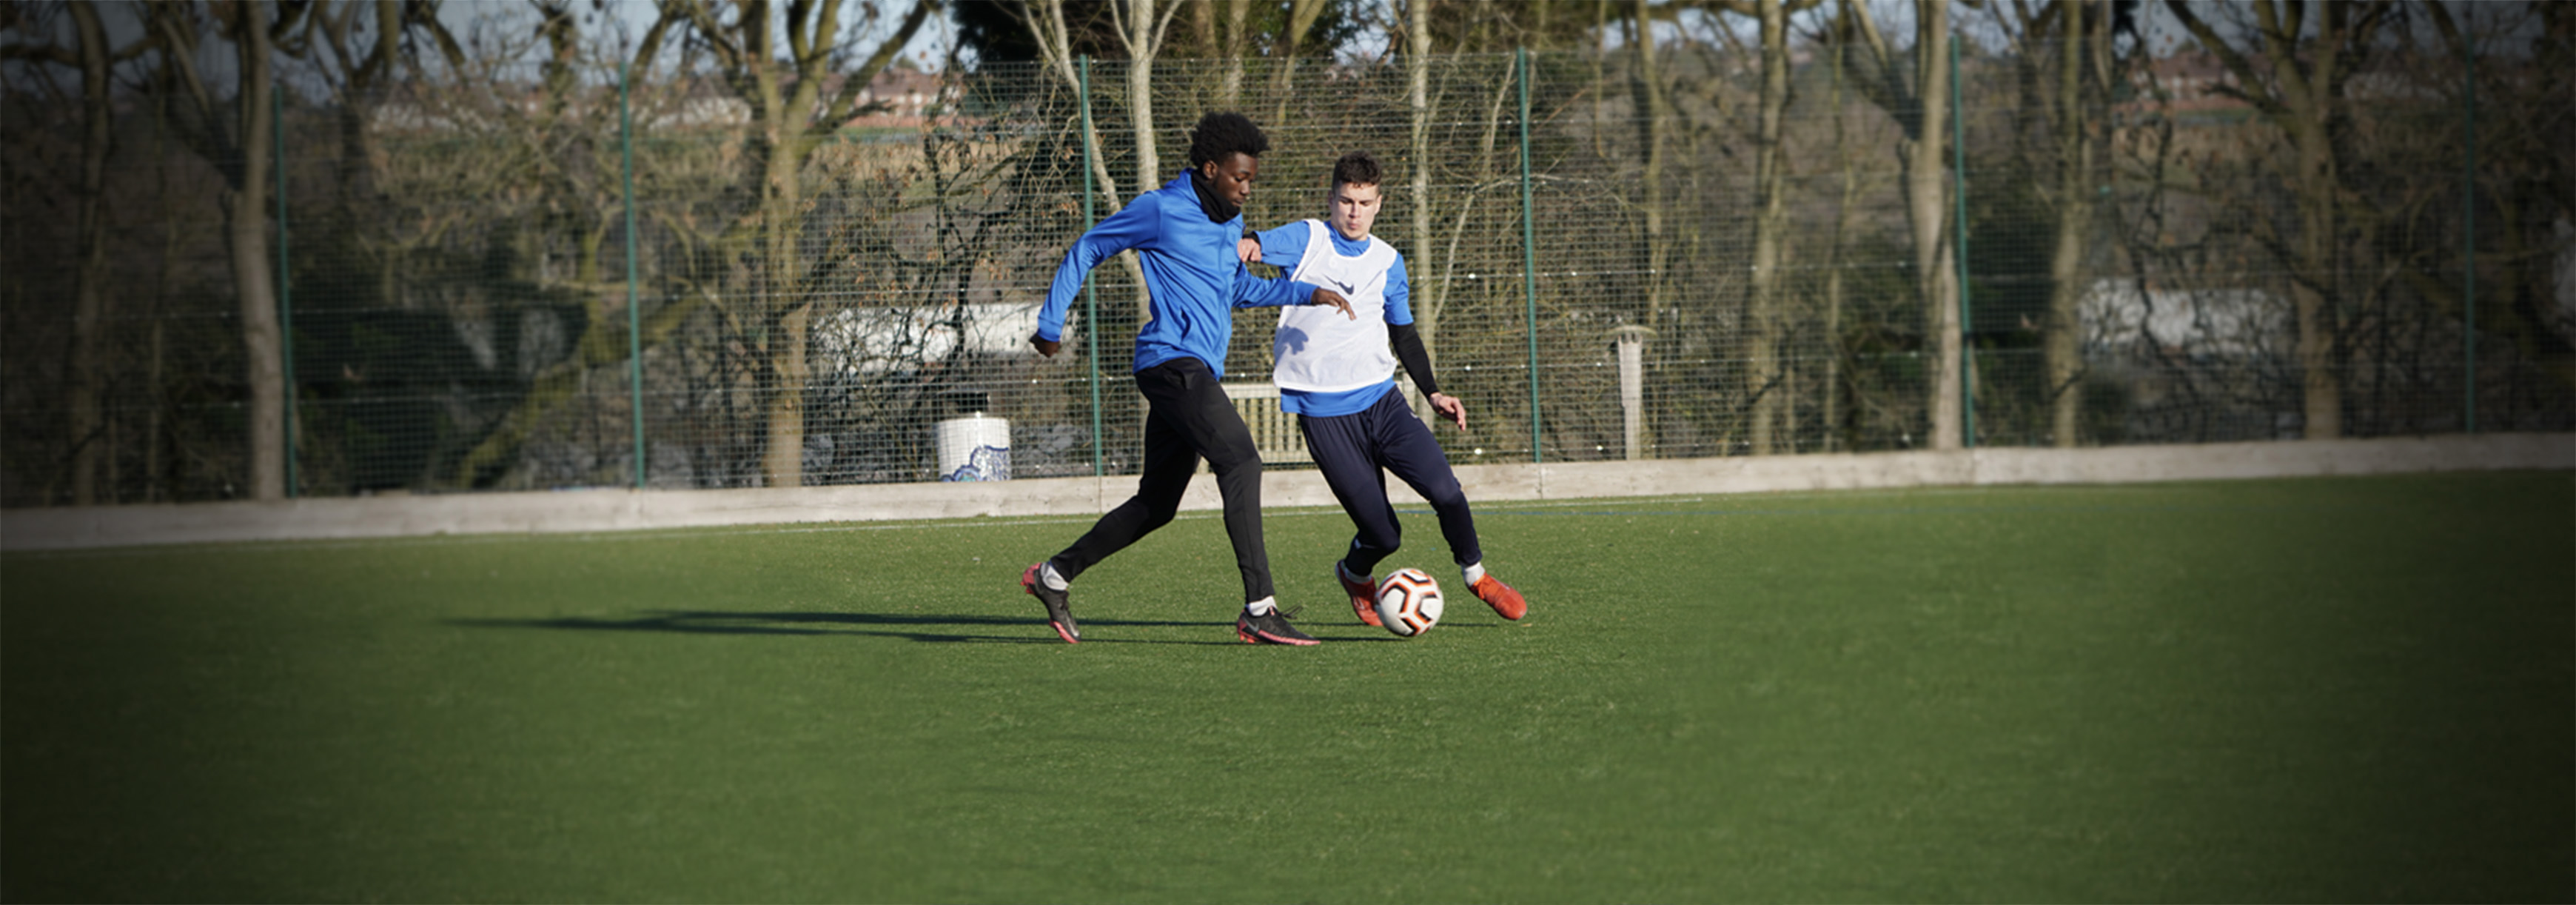 During a 1v1 practice, a player runs with the ball while his opponent looks to make a tackle.